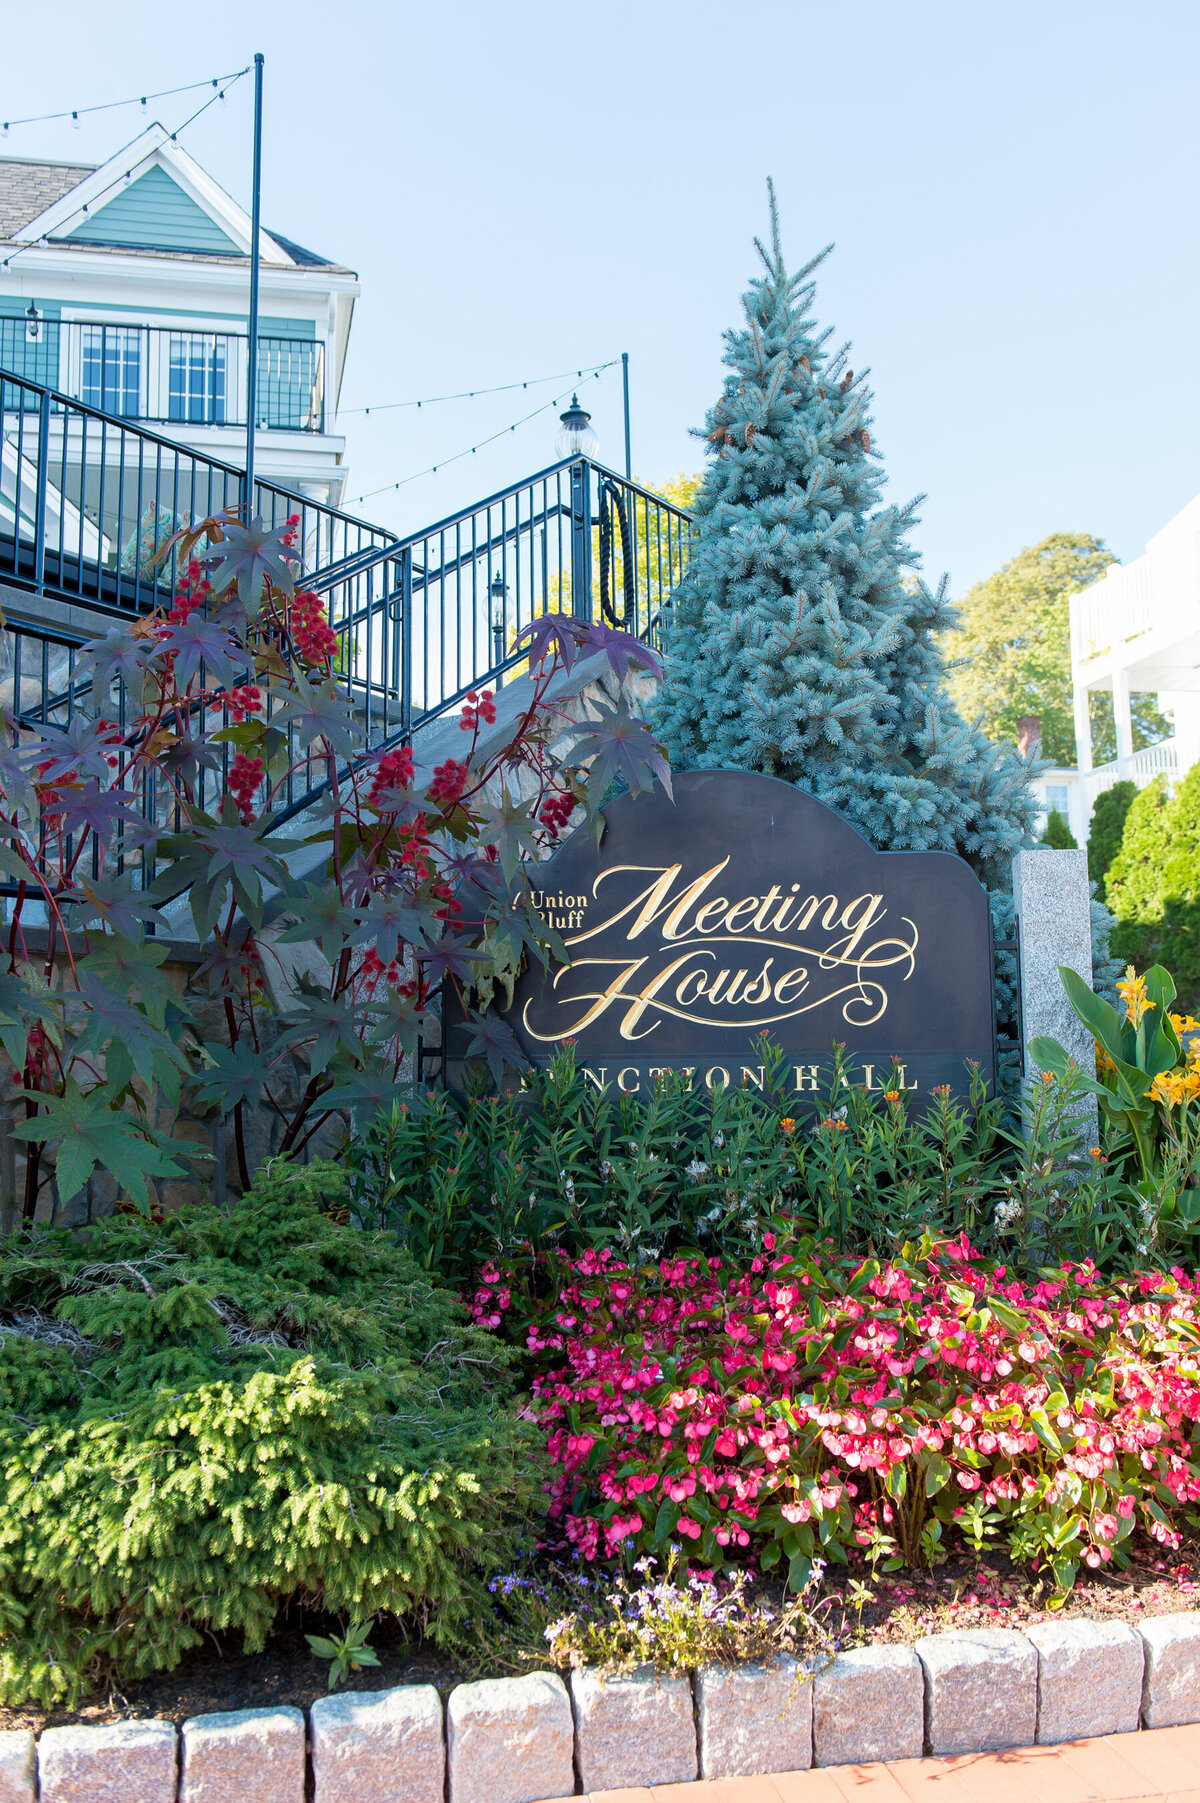 The Meeting House Unon Bluff Hotel Entrance sign York Beach Maine